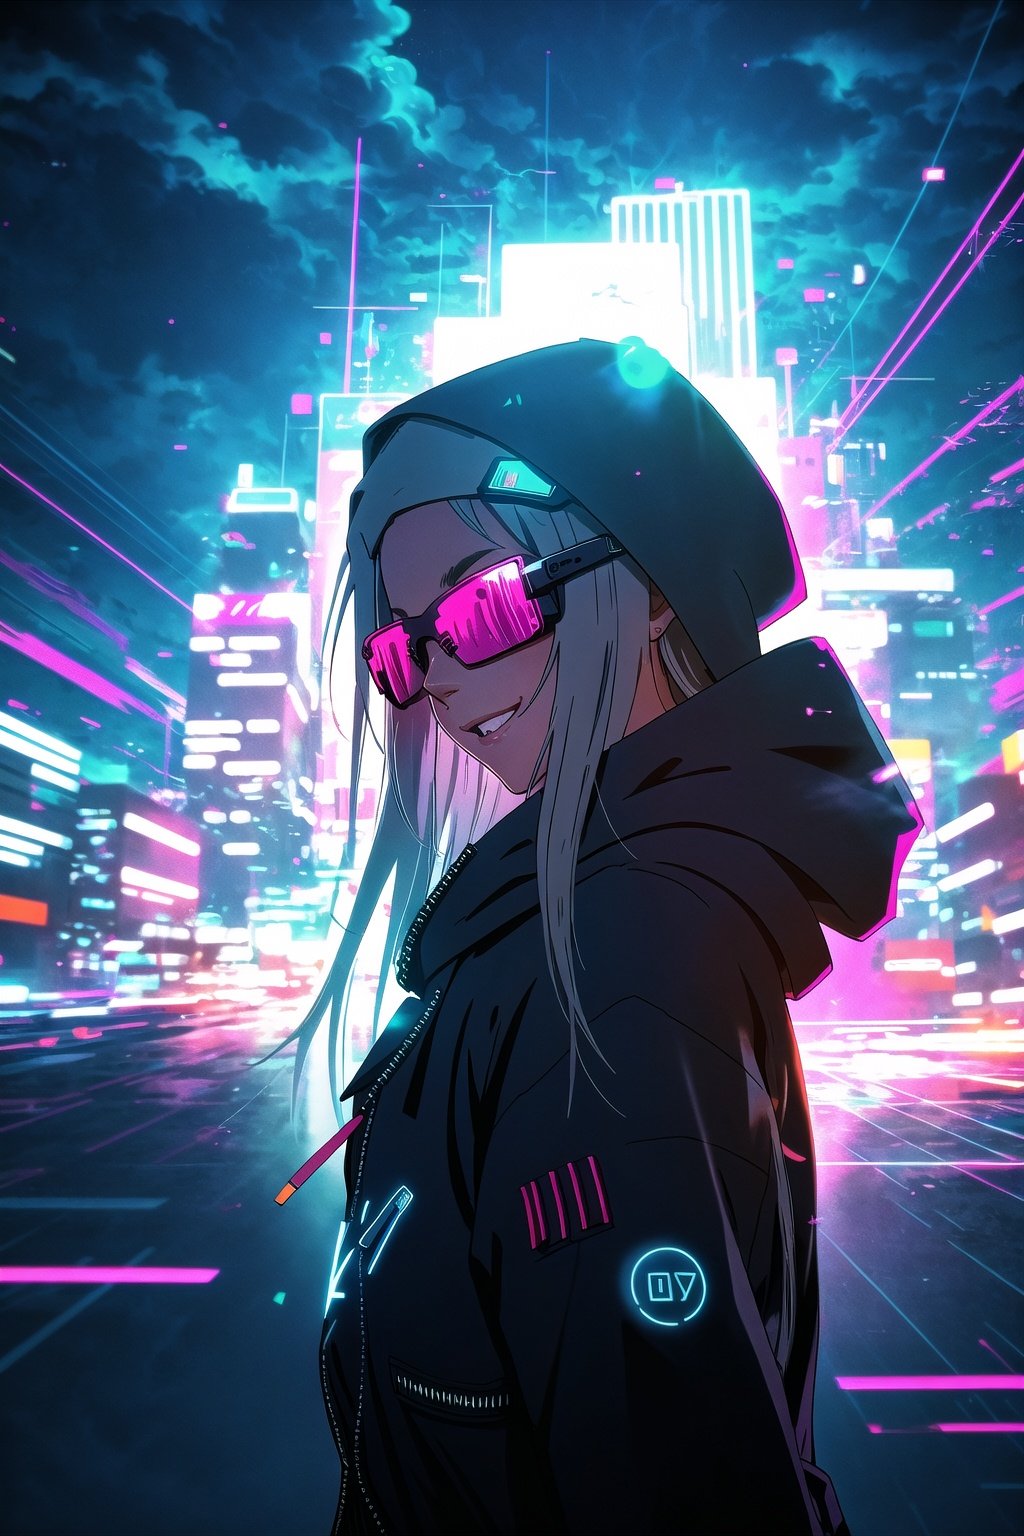 guiltys, happy, a girl, pixel glasses on, gray dreads hair, hoody on, upper body, deal with it, dj theme, synthwave theme, (bokeh:1.1), depth of field, style of Alena Aenami, tracers, vfx, splashes, lightning, light particles, electric, white background